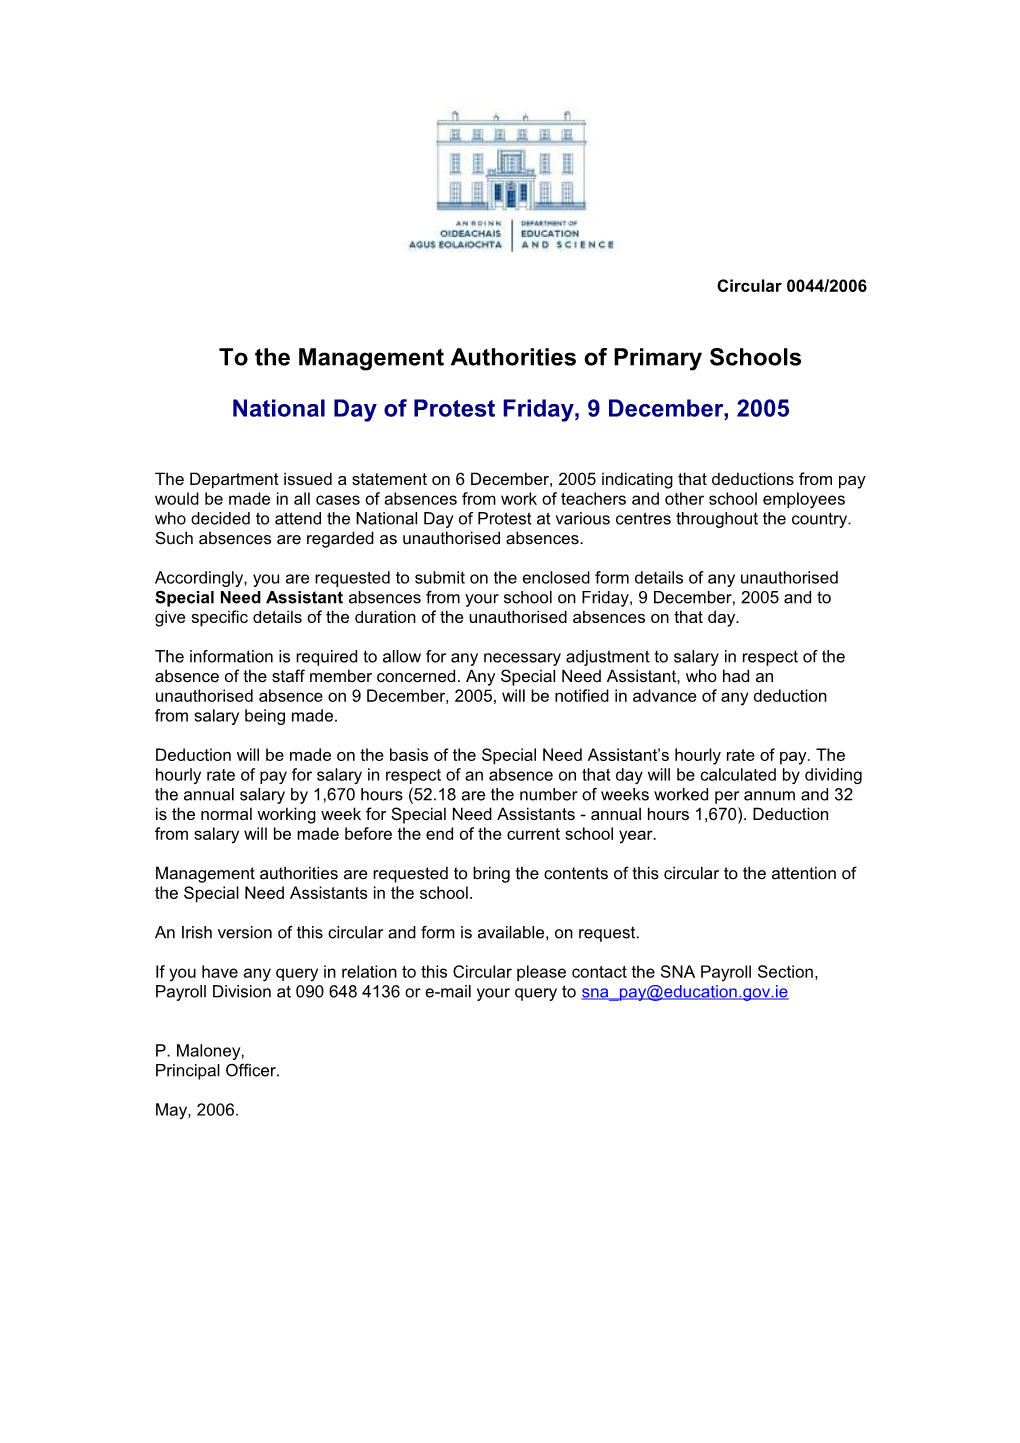 Circular 0044/2006 - National Day of Protest - Special Need Assistant, Primary (File Format